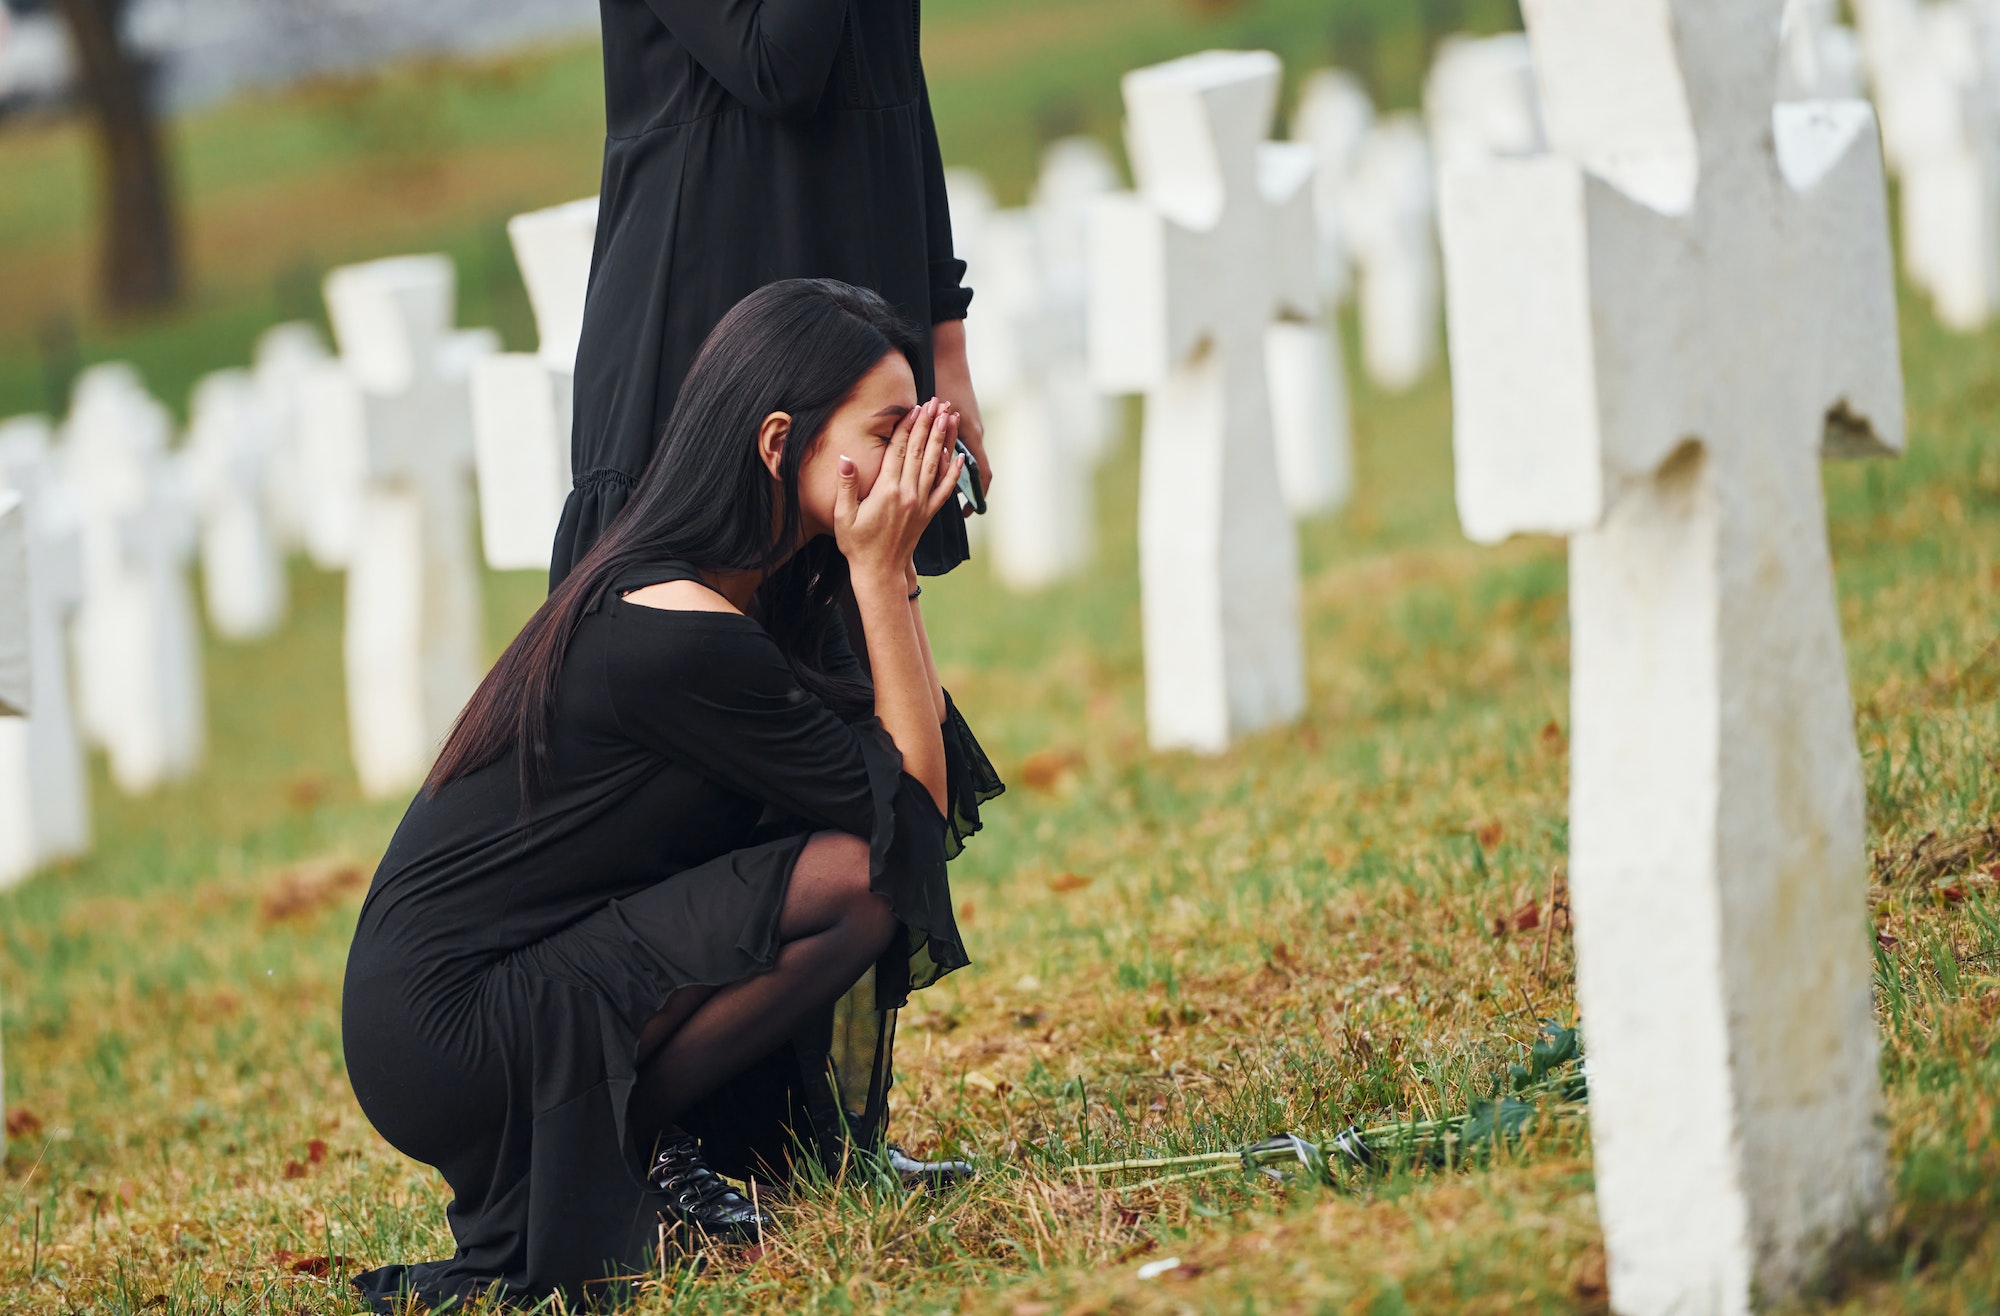 Two young women in black clothes visiting cemetery with many white crosses